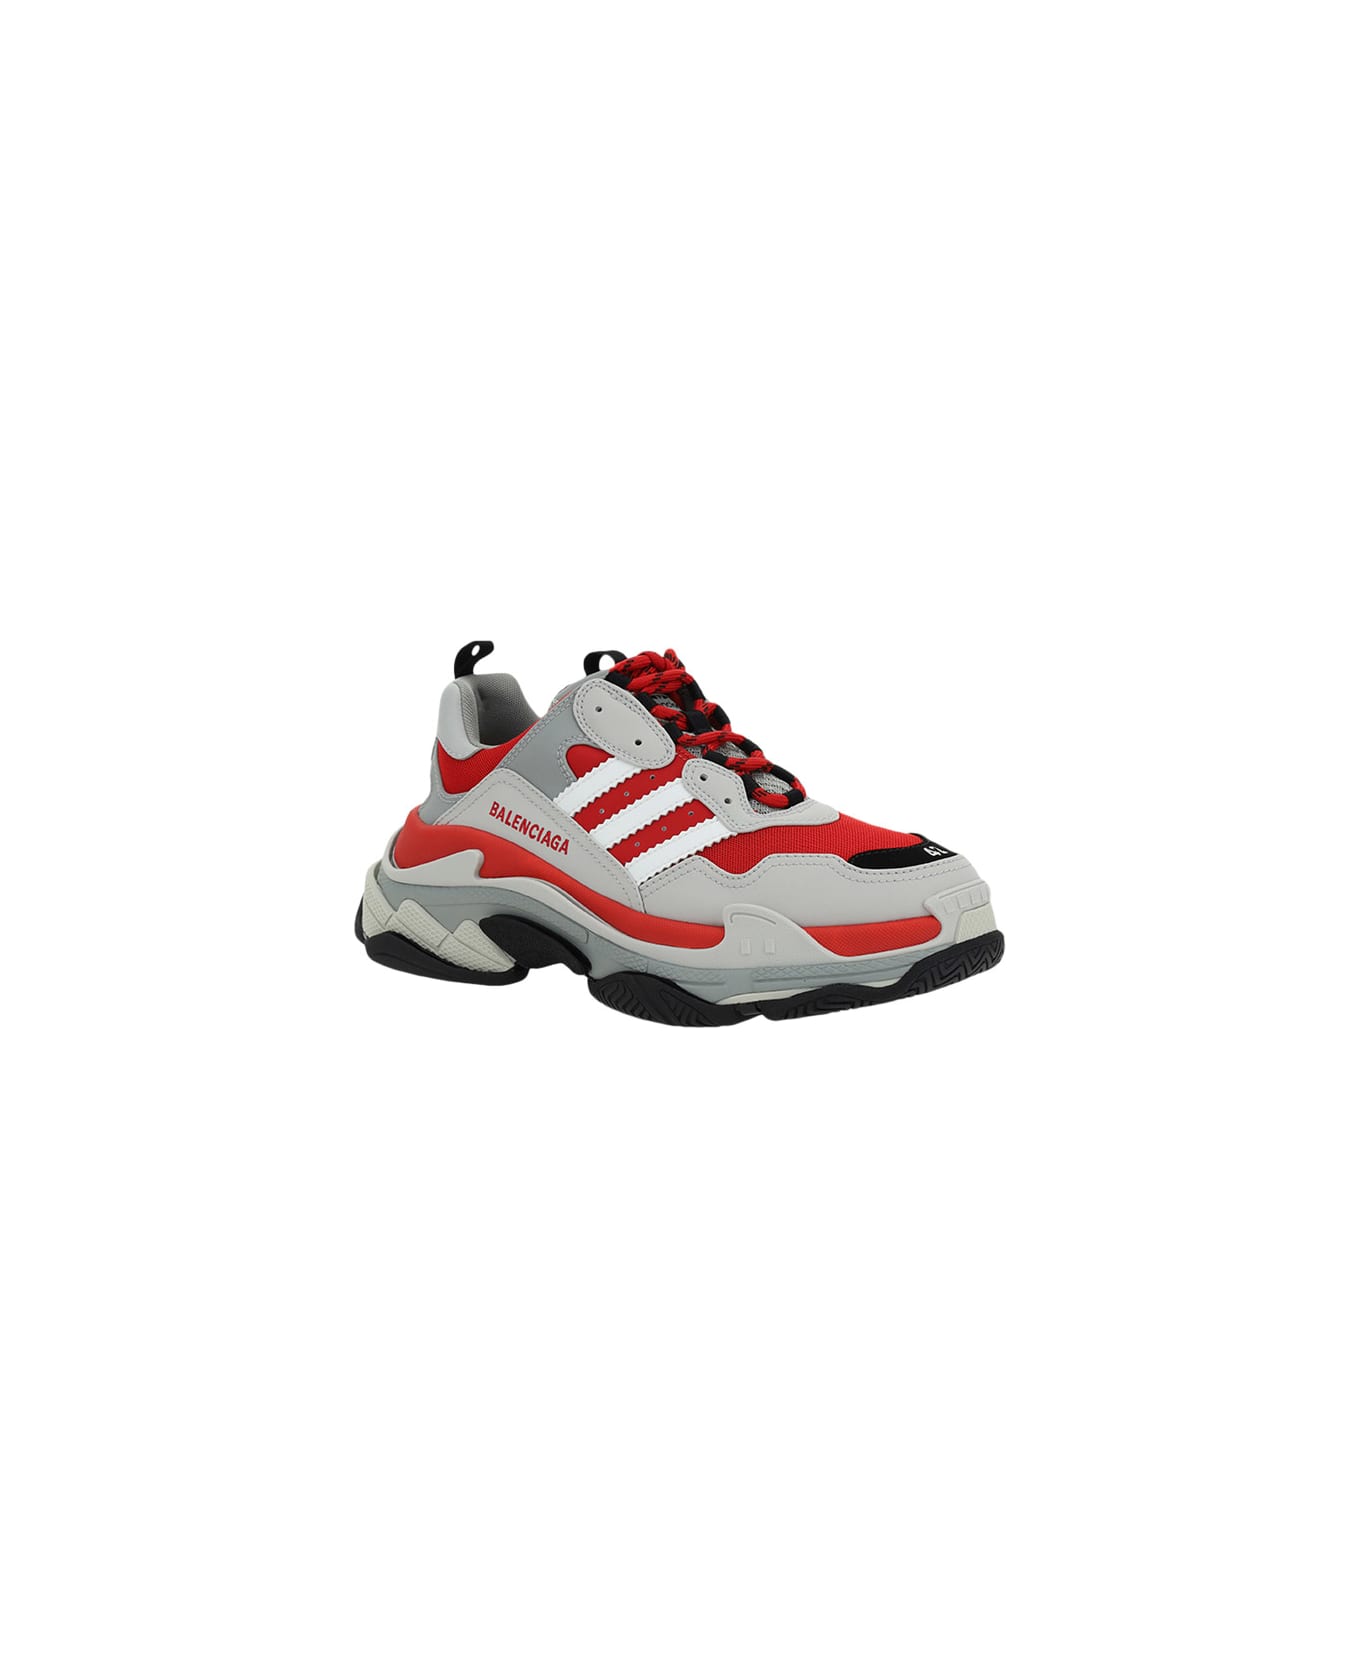 Balenciaga X Adidas Triple S Leather Sneakers - Red スニーカー